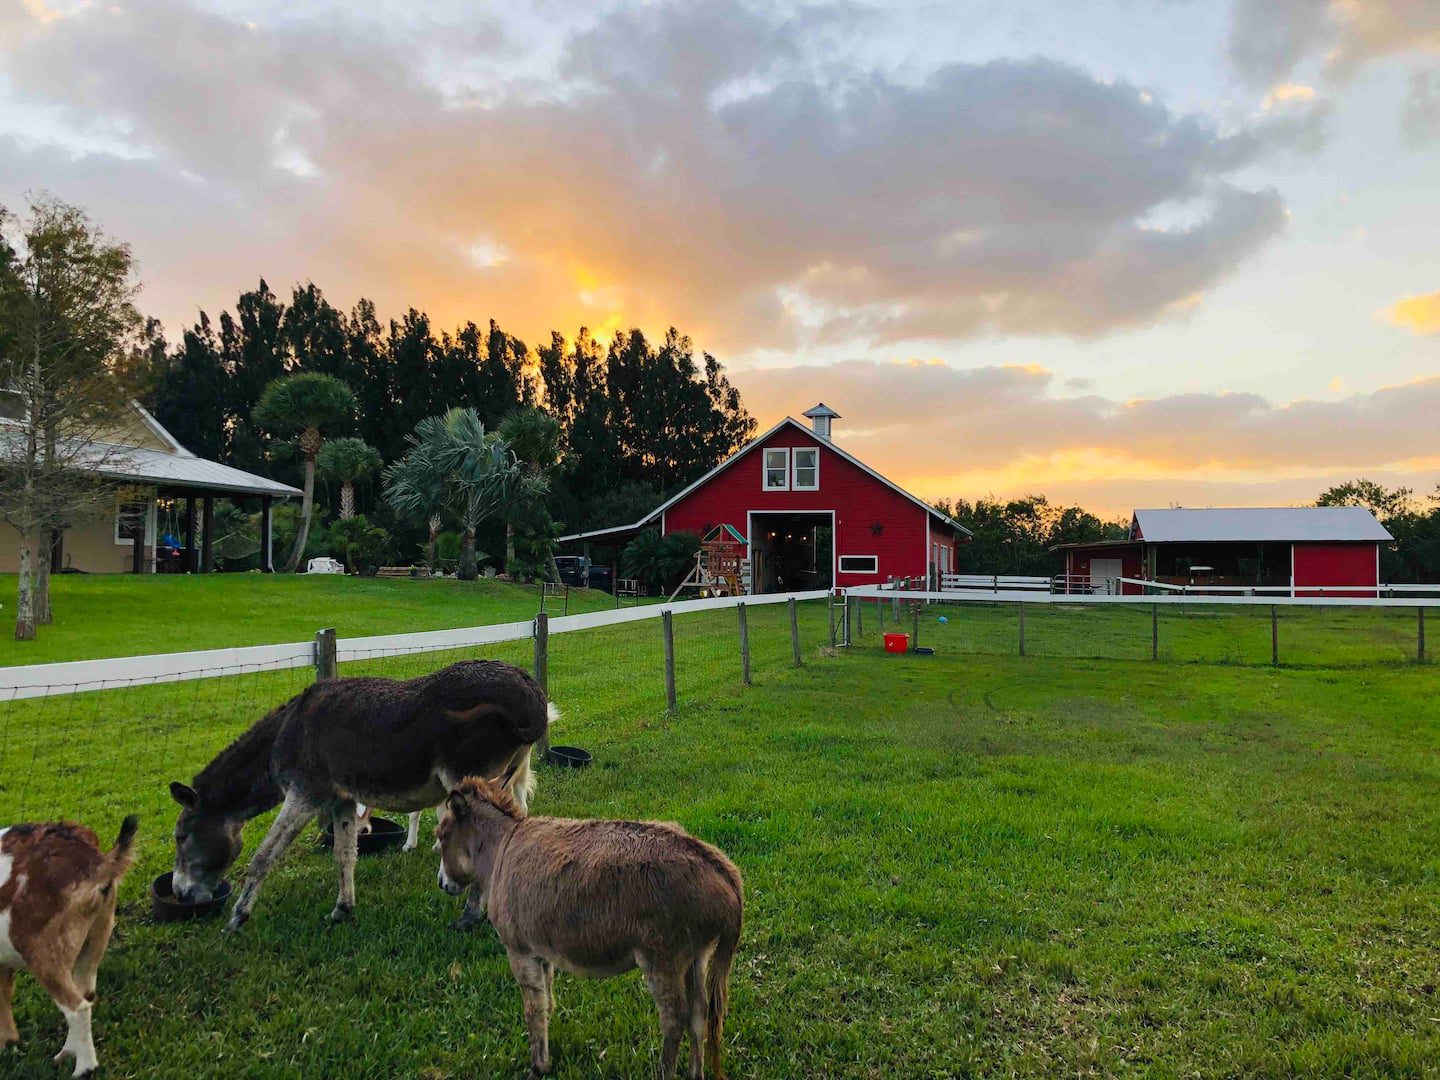 Pura Via farm room, one of the most unique and best Airbnb Stays in Florida